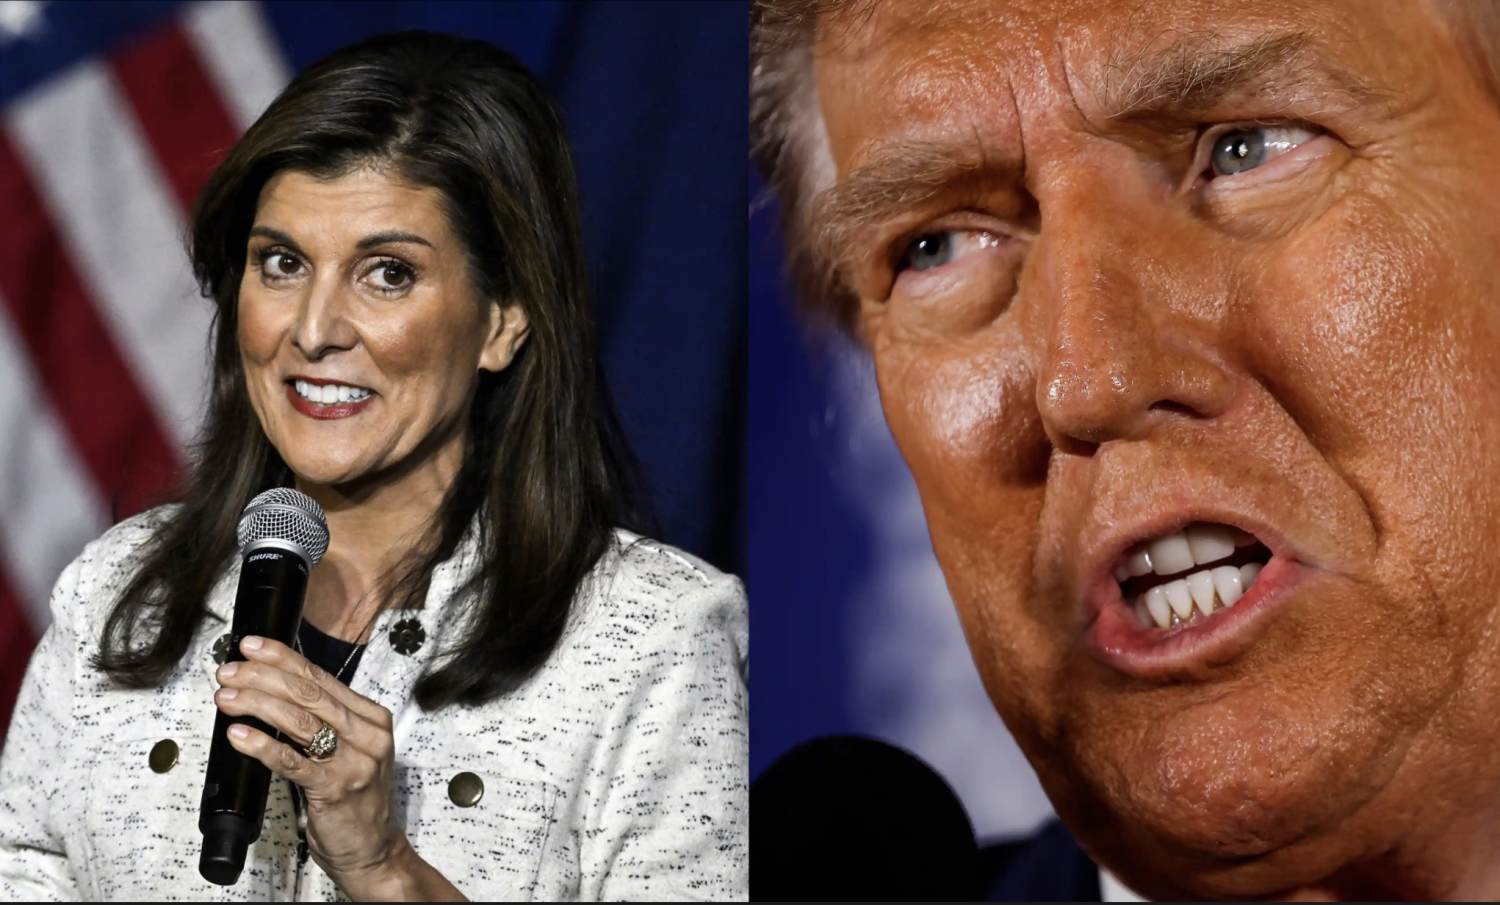 Trump won the Iowa caucuses by a landslide and handily beat Haley in New Hampshire, but she remains a thorn in his side. Composite: Anadolu, Getty Images